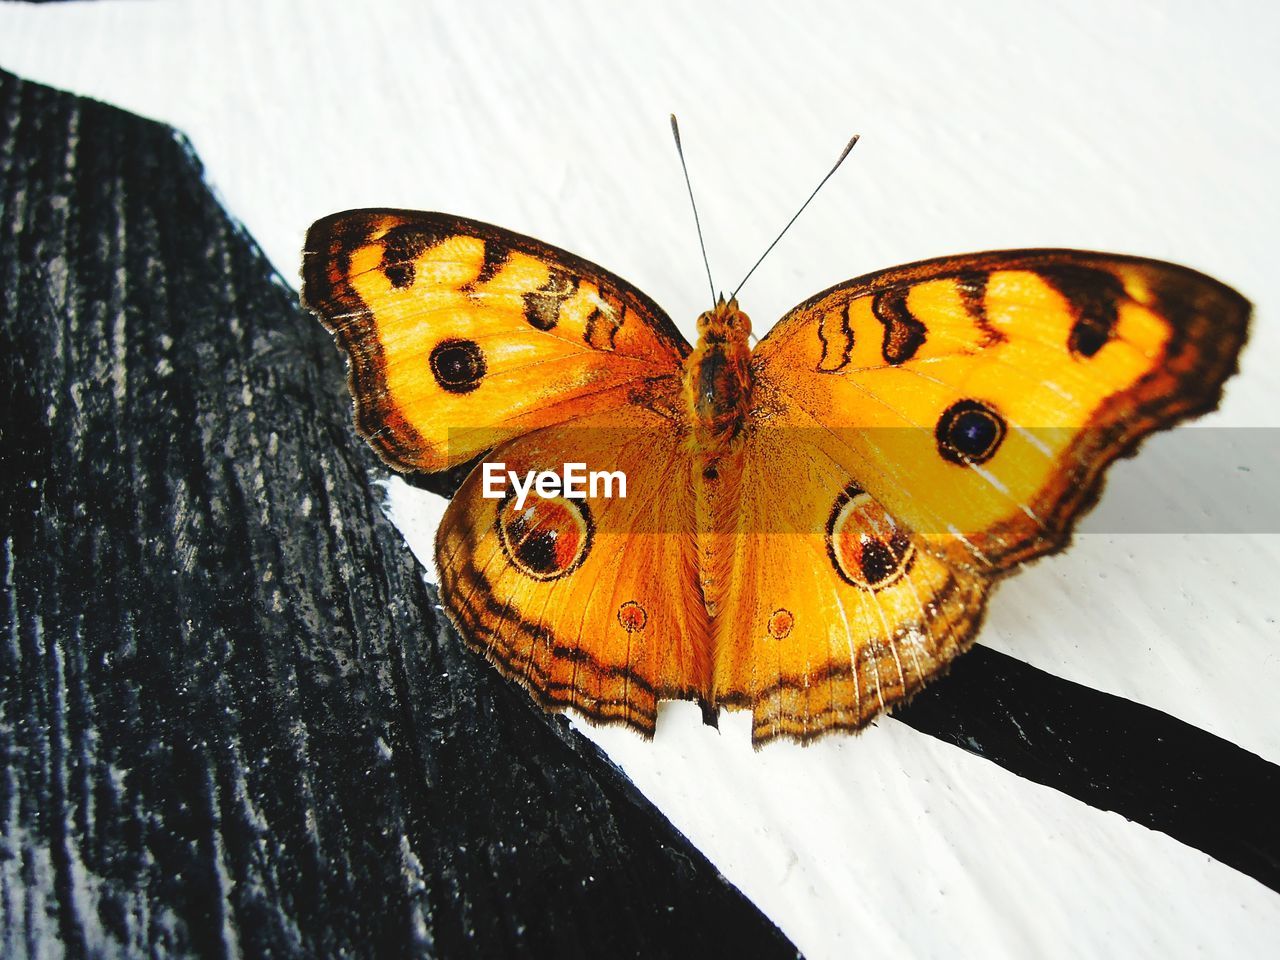 CLOSE-UP OF BUTTERFLY ON ORANGE